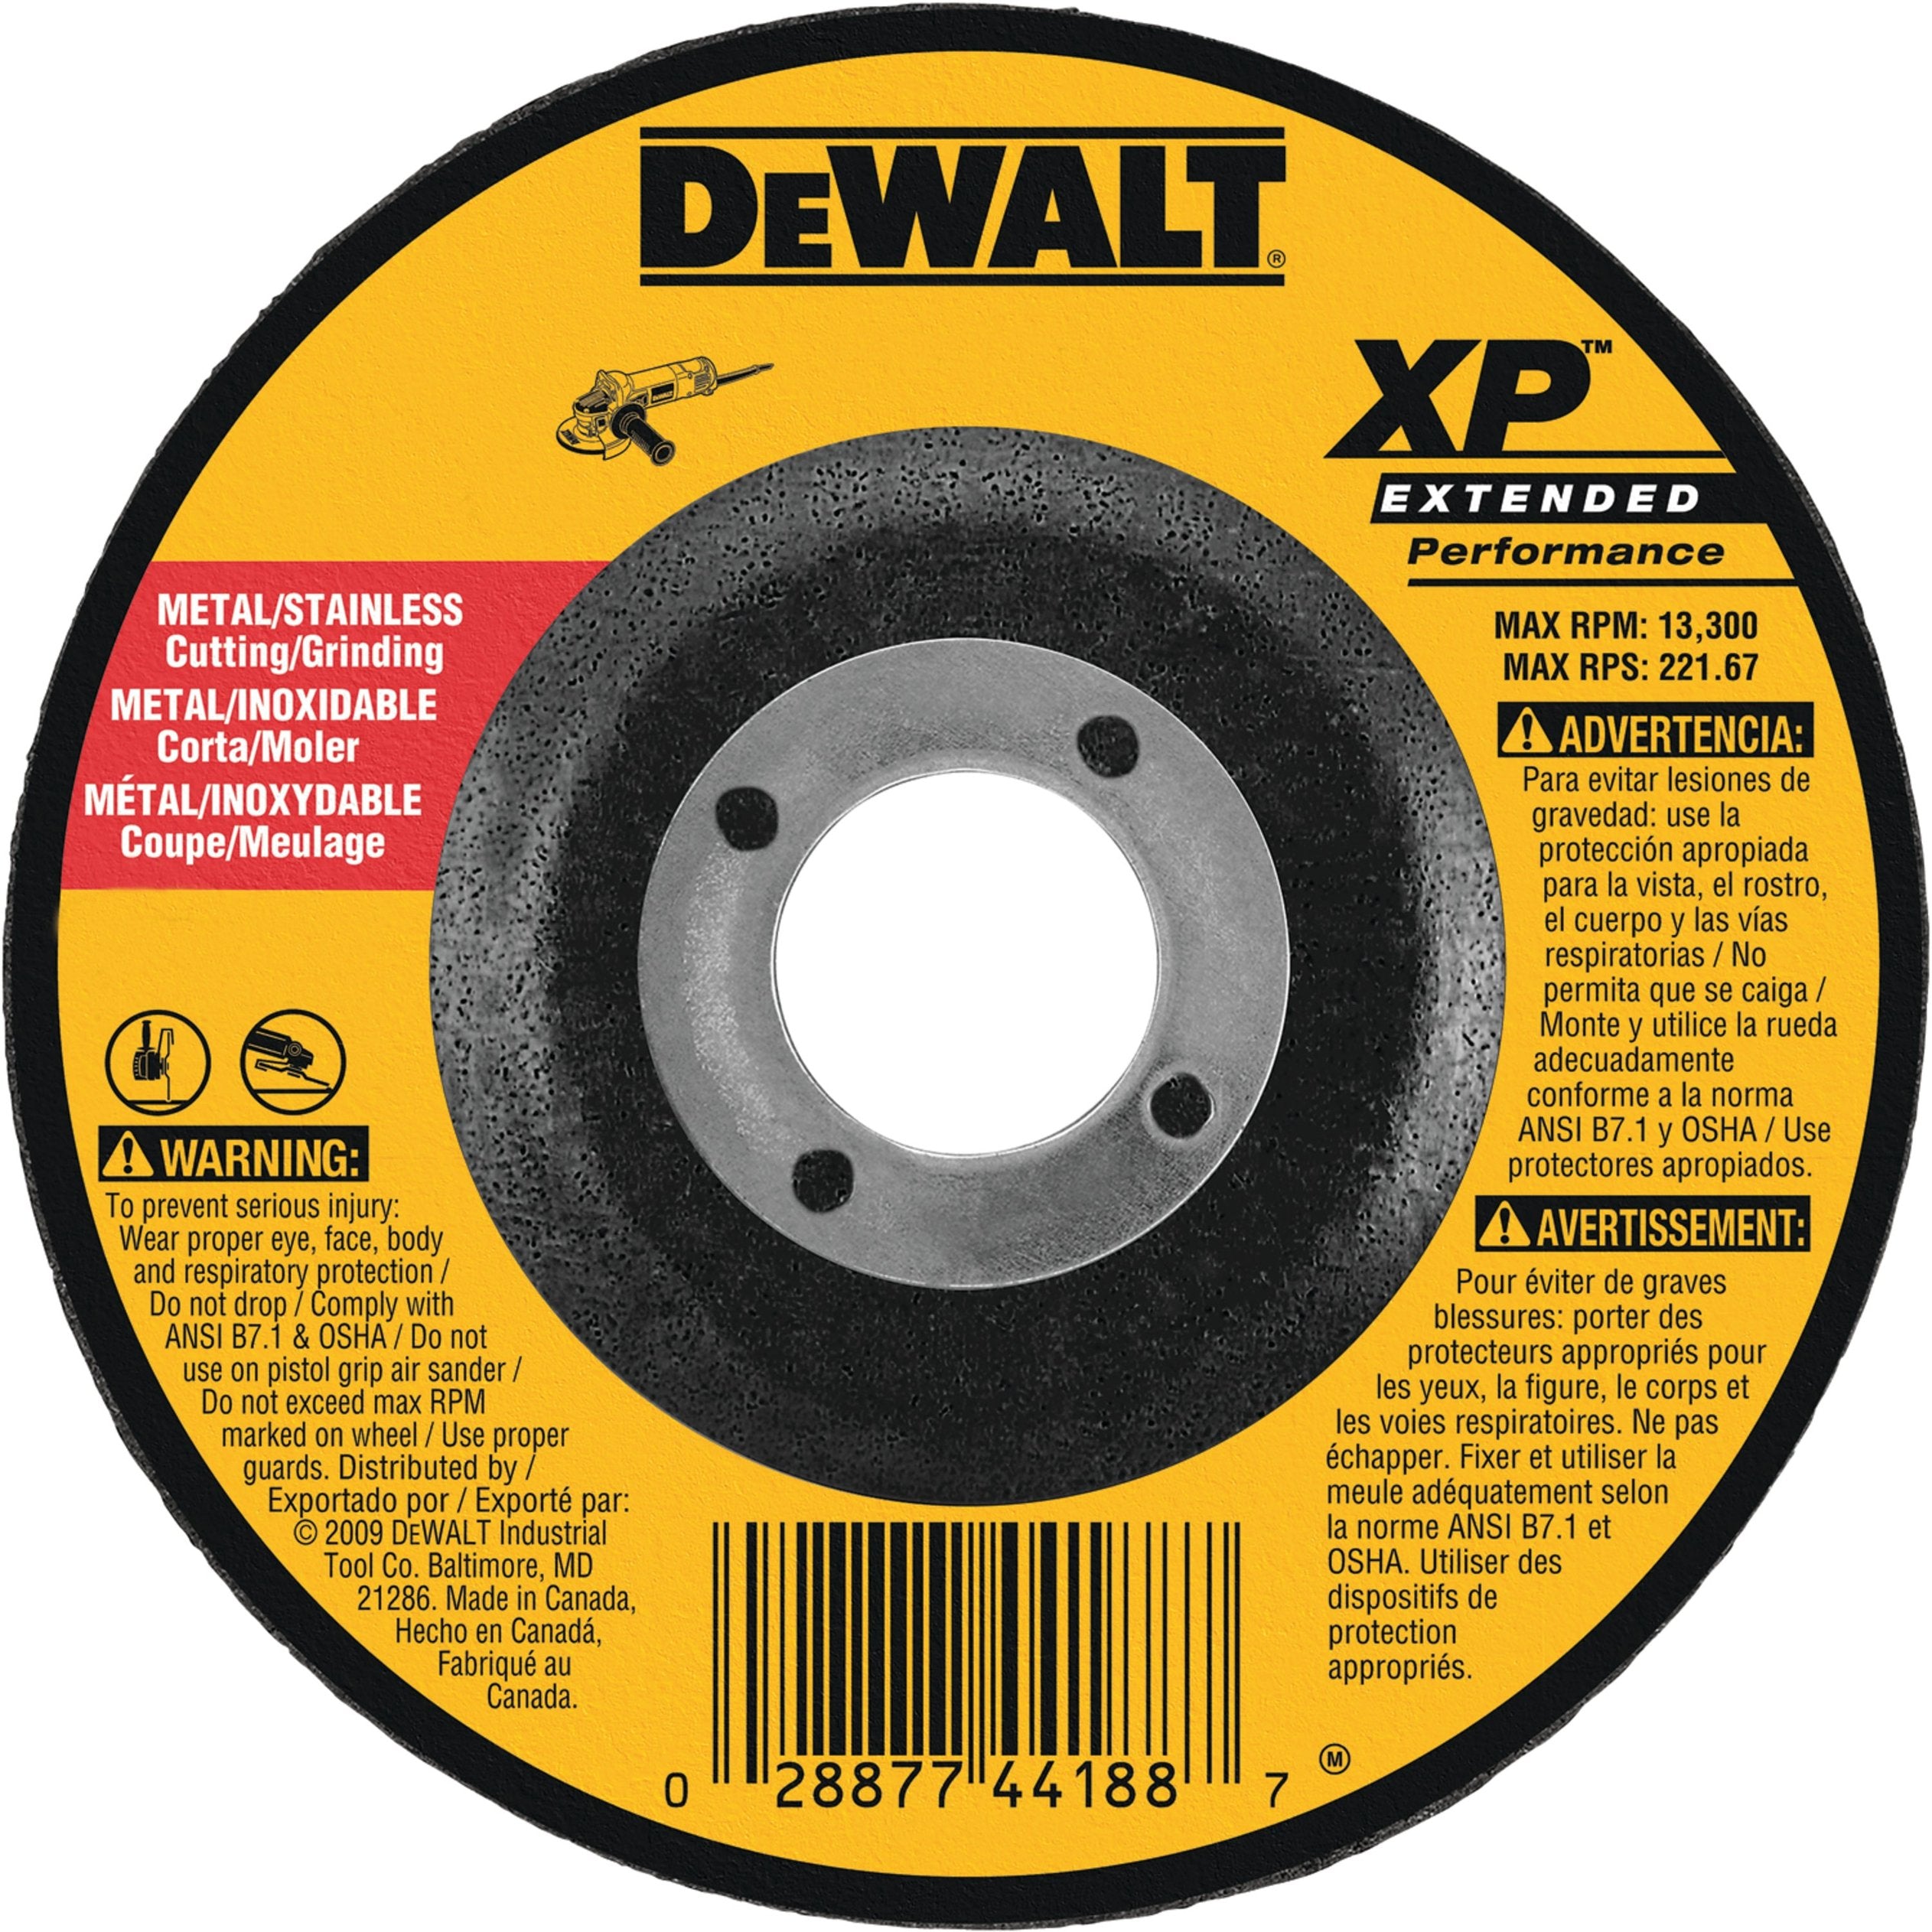 DEWALT DW8808 4-1/2-Inch by 1/4-Inch Extended Performance Grinding Wheel, 7/8-Inch Arbor